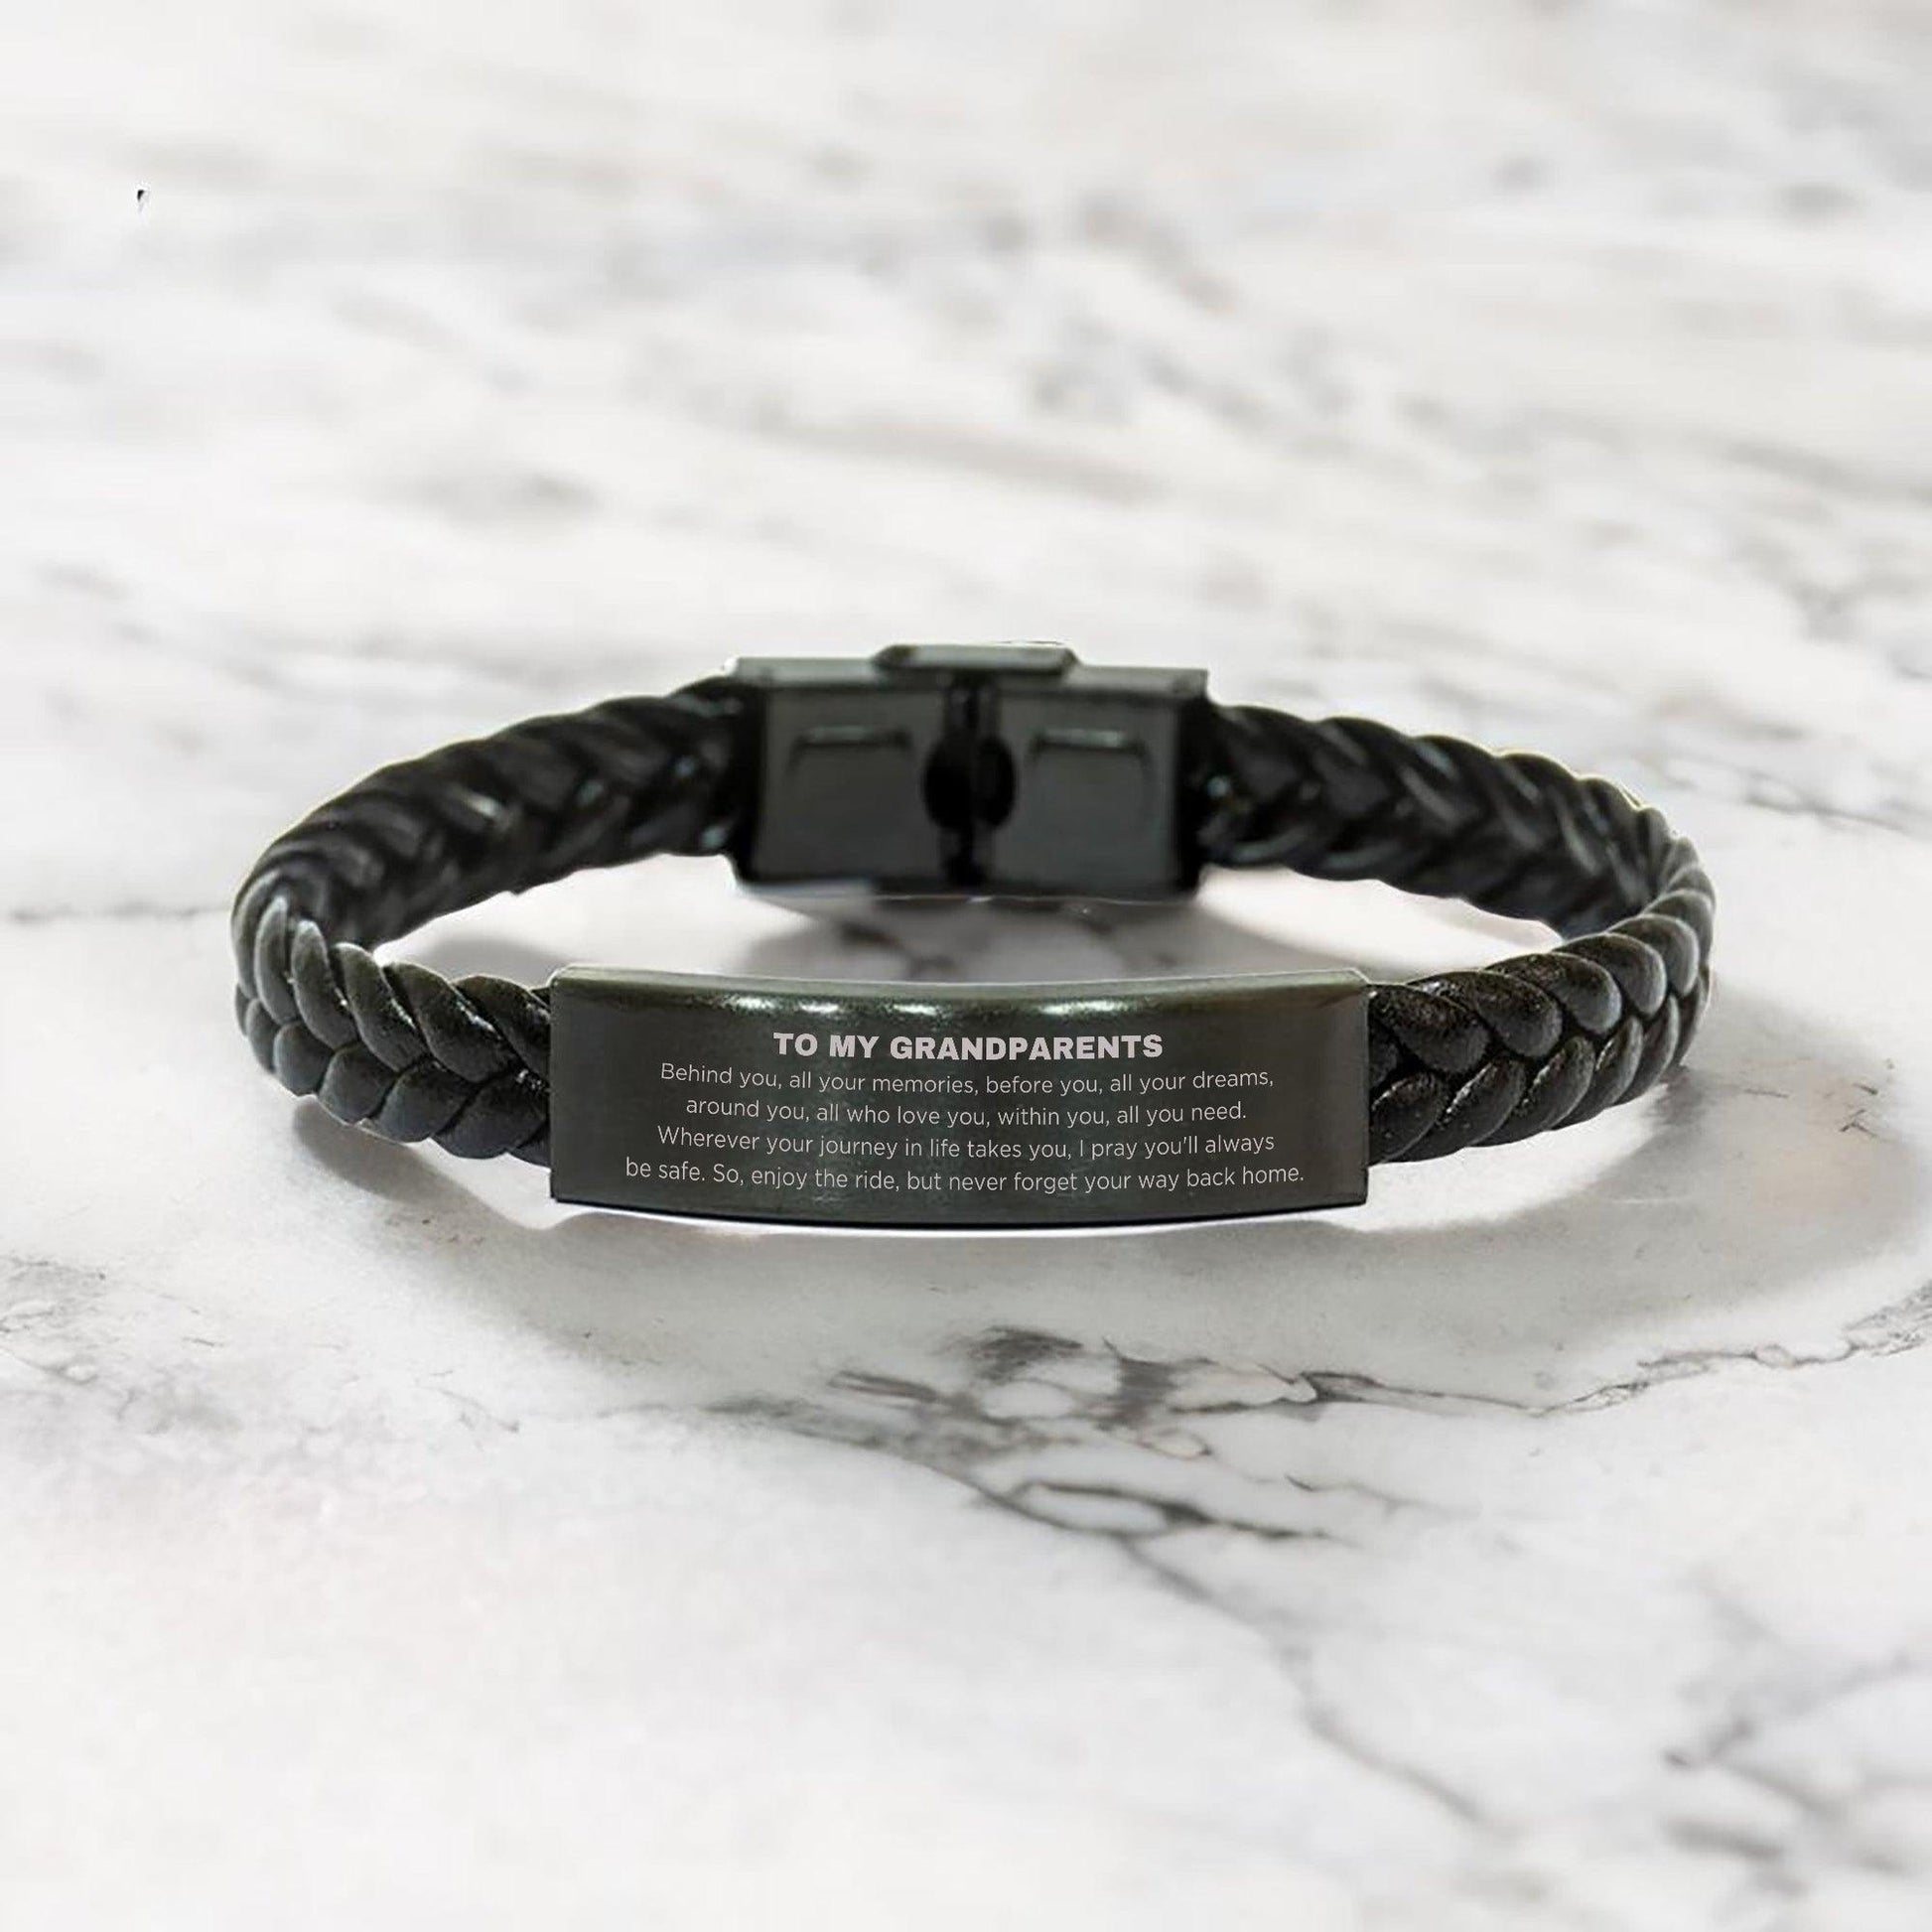 Grandparents Braided Leather Bracelet Birthday Christmas Unique Gifts Behind you, all your memories, before you, all your dreams - Mallard Moon Gift Shop